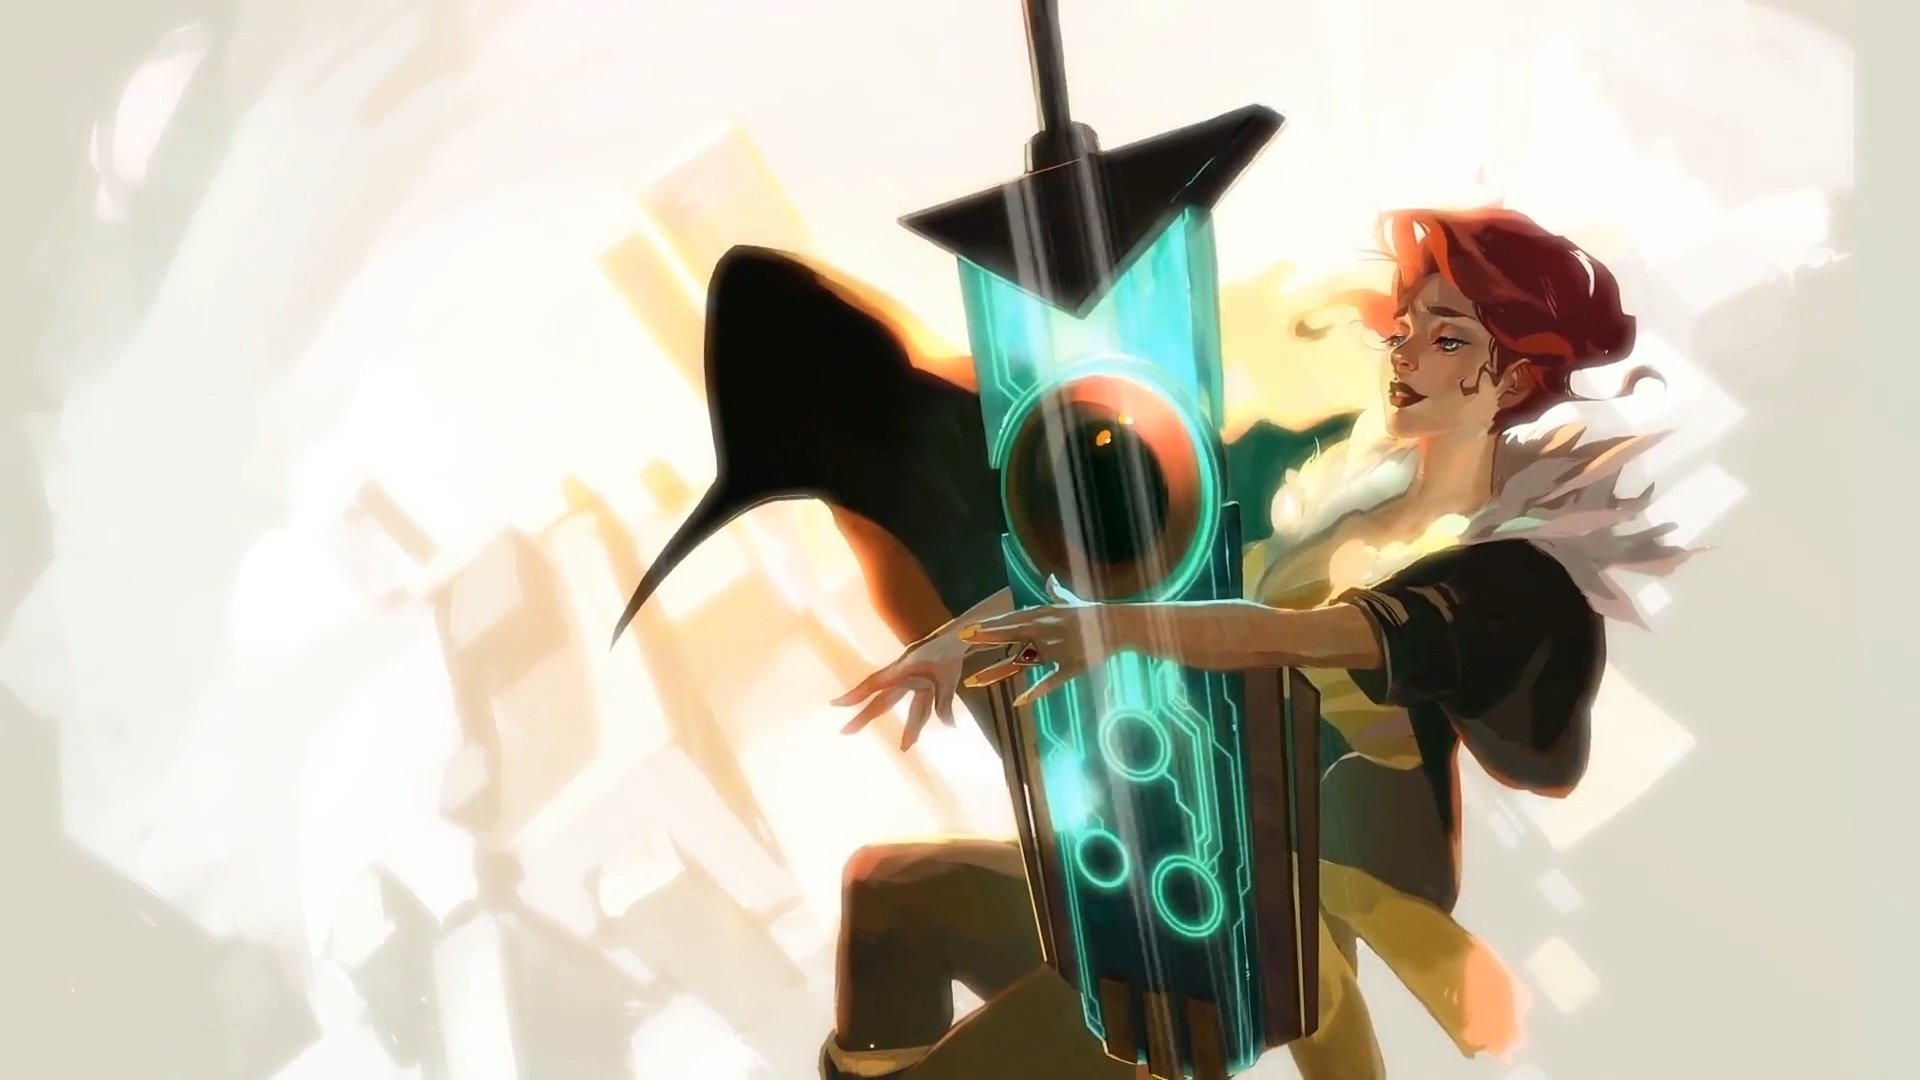 HD desktop wallpaper featuring an artistic representation of a person with a futuristic Transistor sword, set against a light backdrop.